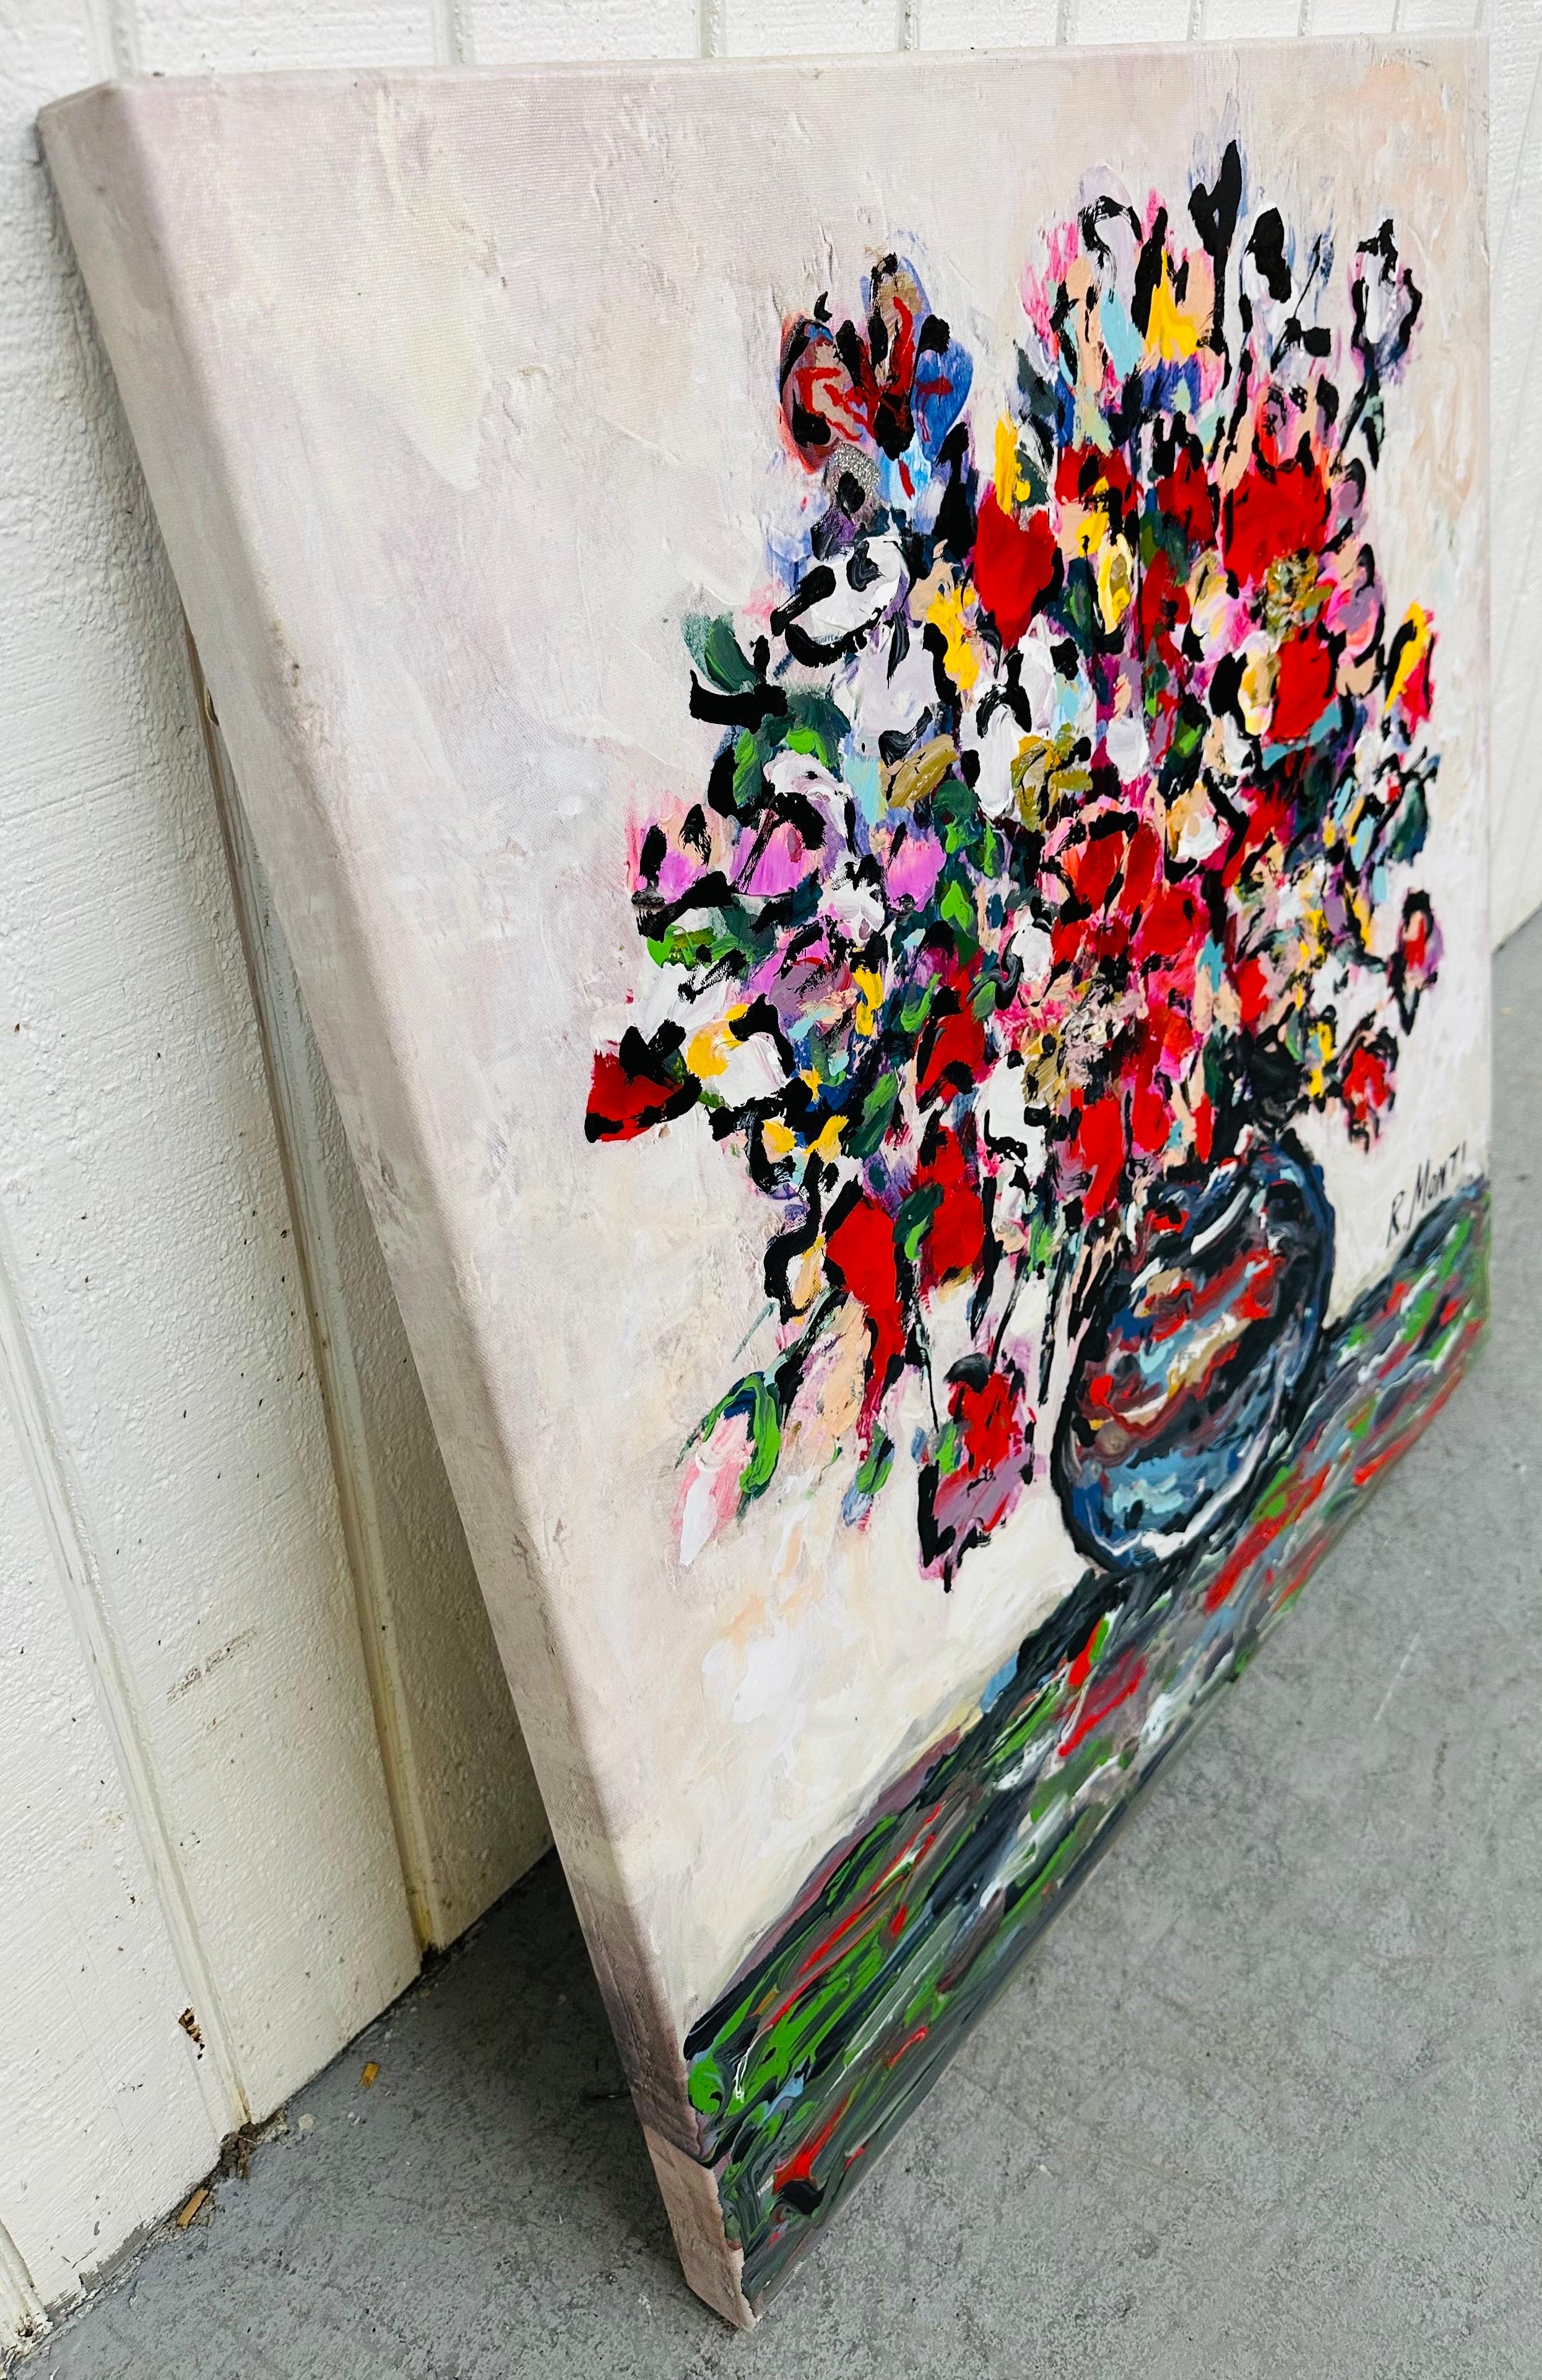 This listing is for a Modern Floral Abstract Painting Signed R. Monti. Featuring a square canvas wrapped frame, abstract painting of flowers sitting in a vase, and a wire on the back for hanging. This is an exceptional piece by artist R. Monti.